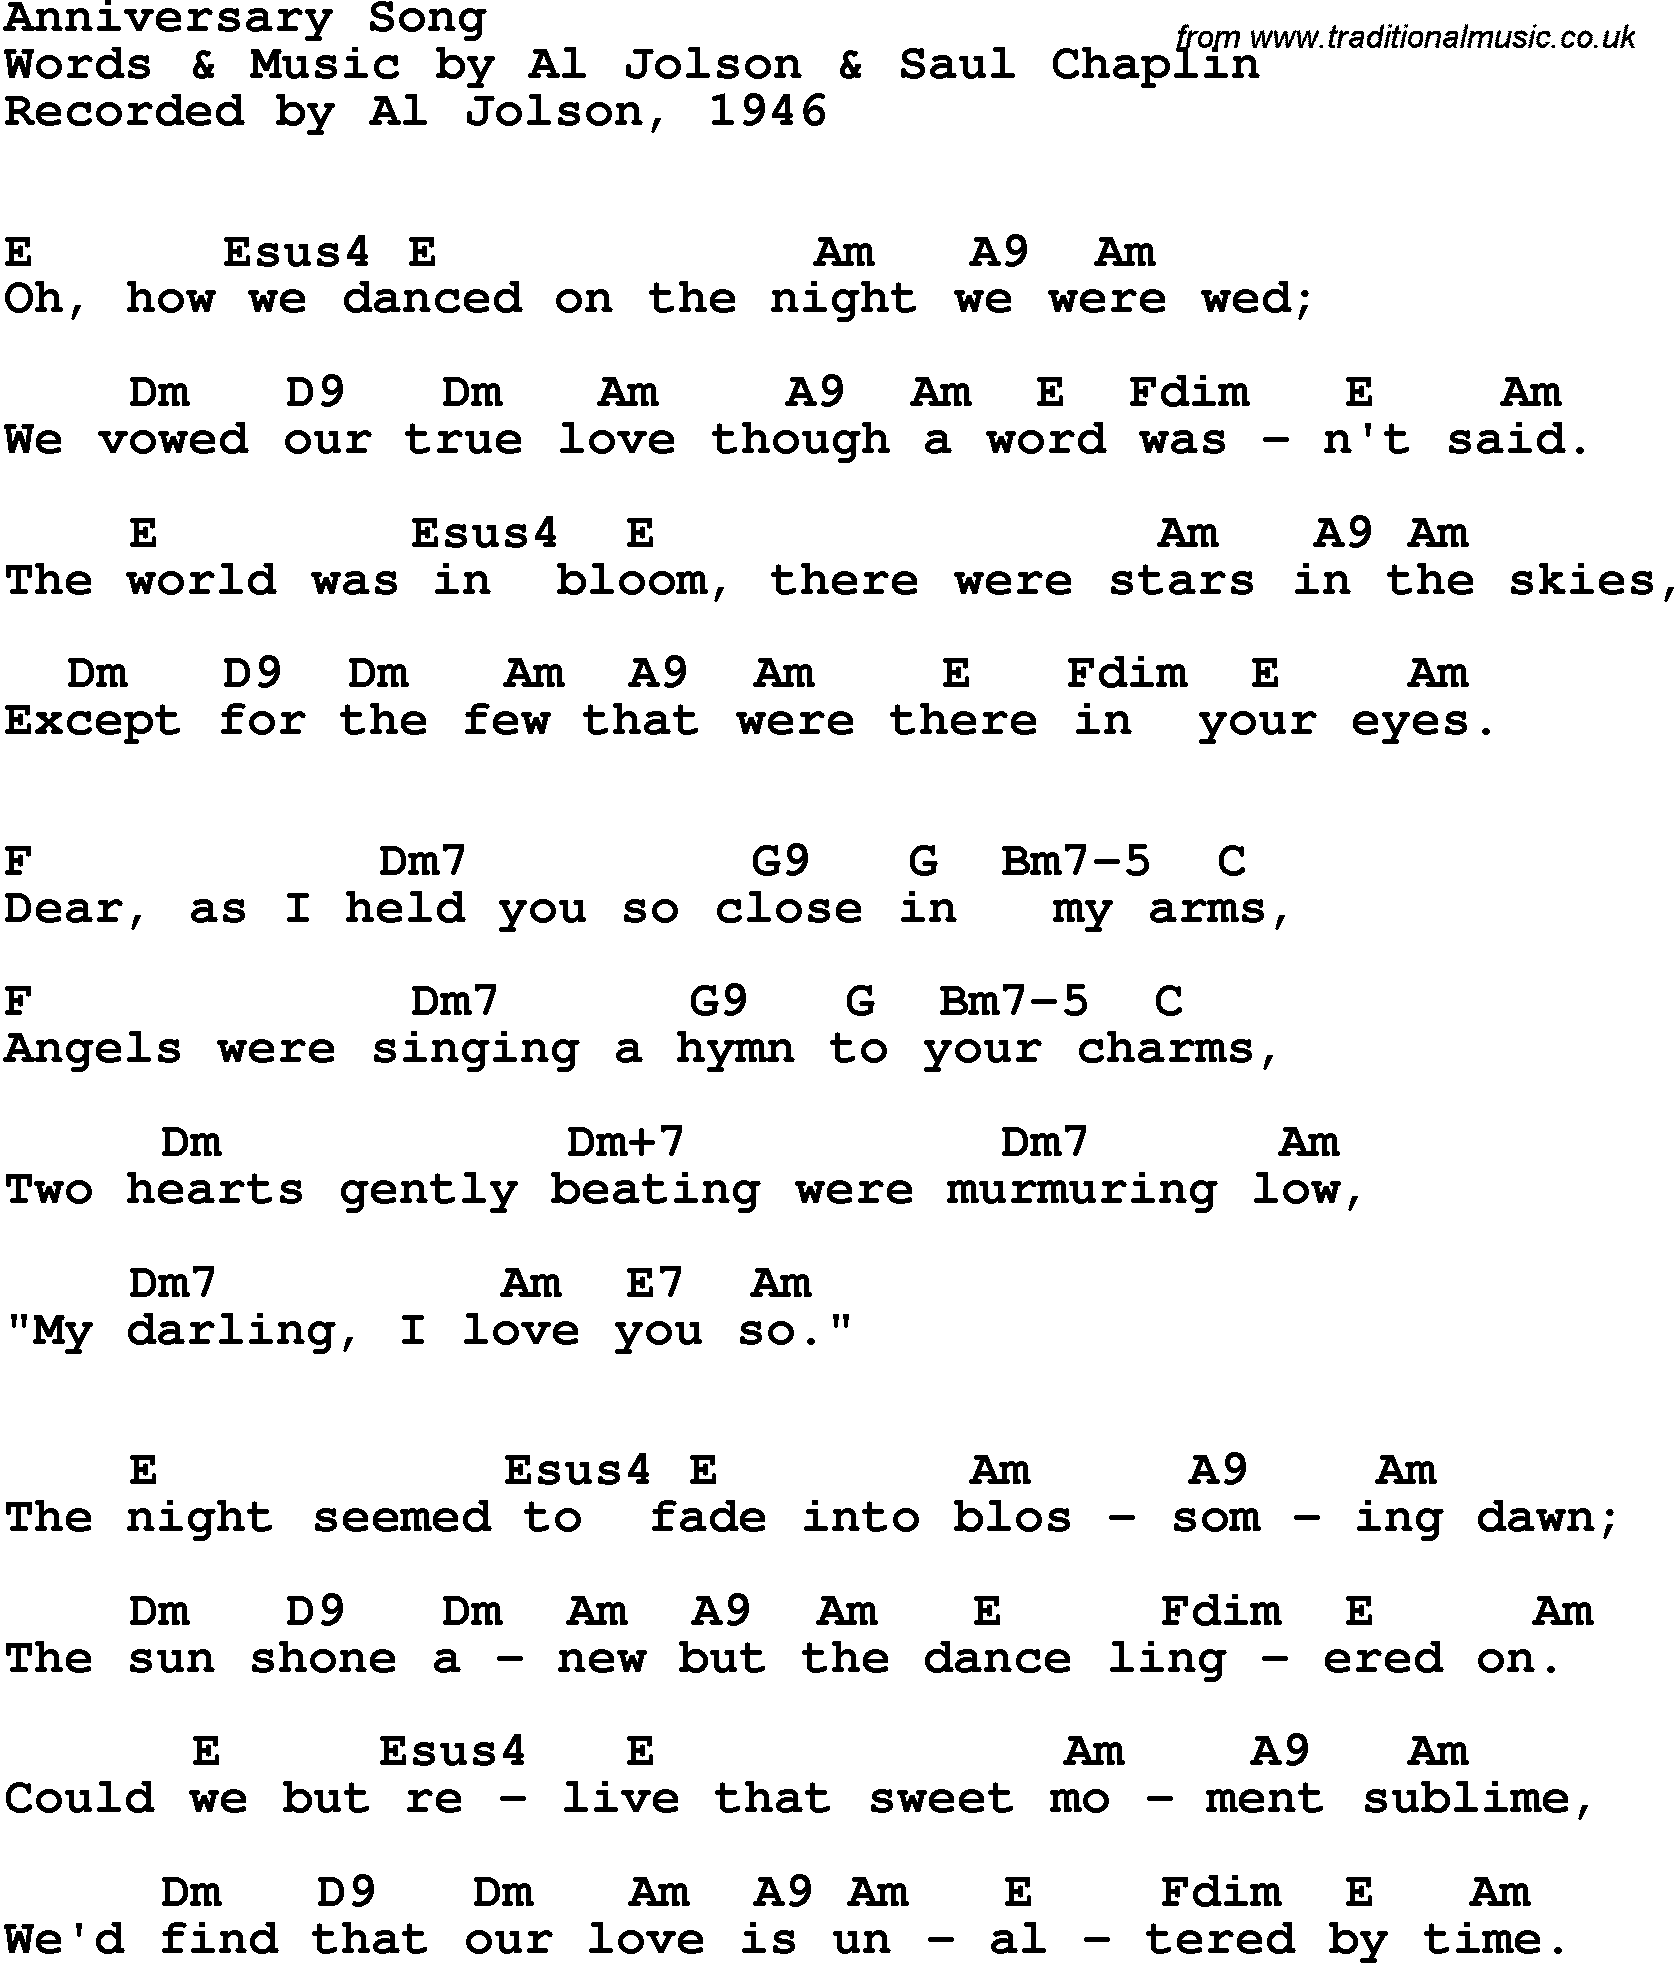 Song Lyrics with guitar chords for Anniversary Song - Al Jolson, 1946